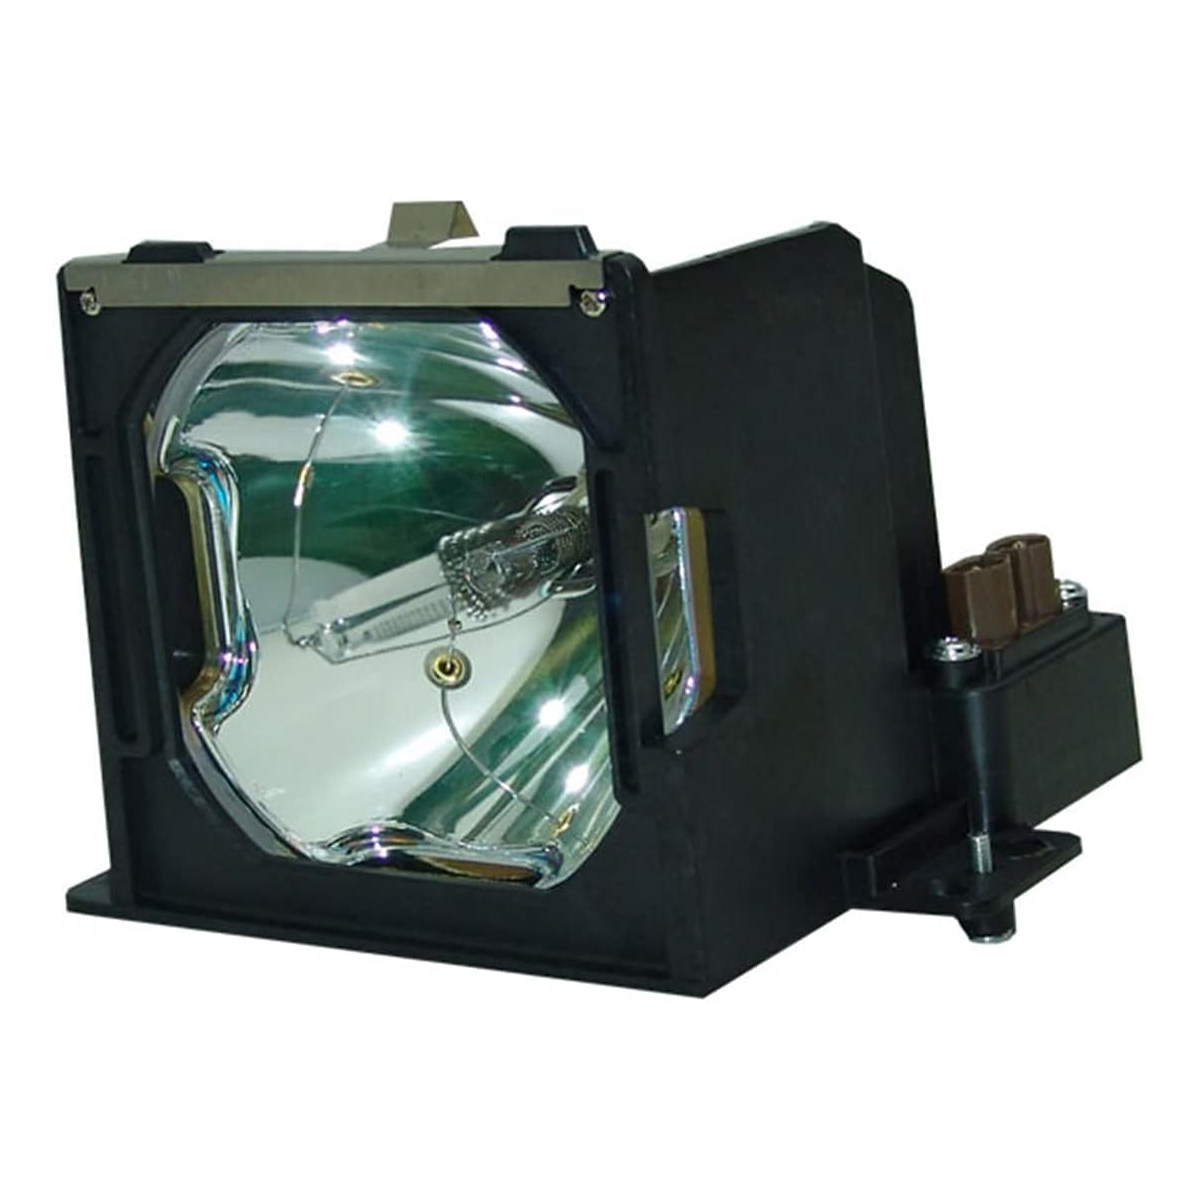 Replacement Projector lamp 03-000750-01P For CHRISTIE LX45/VIVID LX37/ VIVID LX45